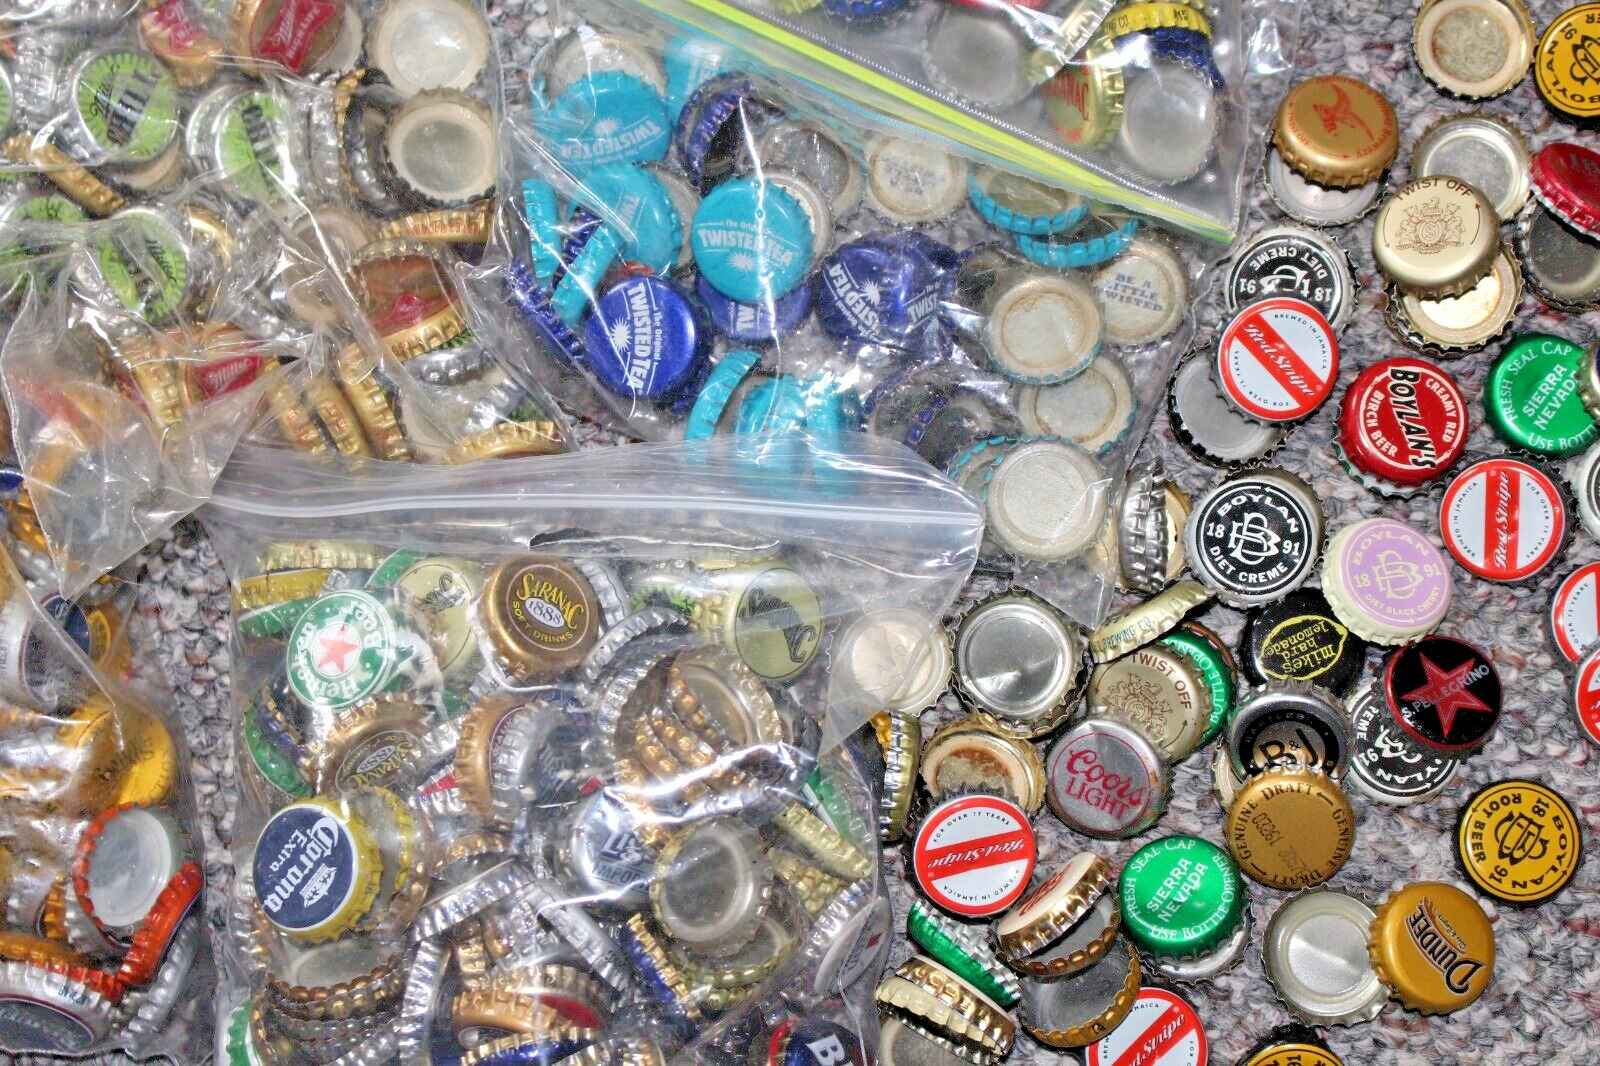 390 Beer Bottle Caps Mixed Lot Recycle Upcycle Craft Projects Collecting